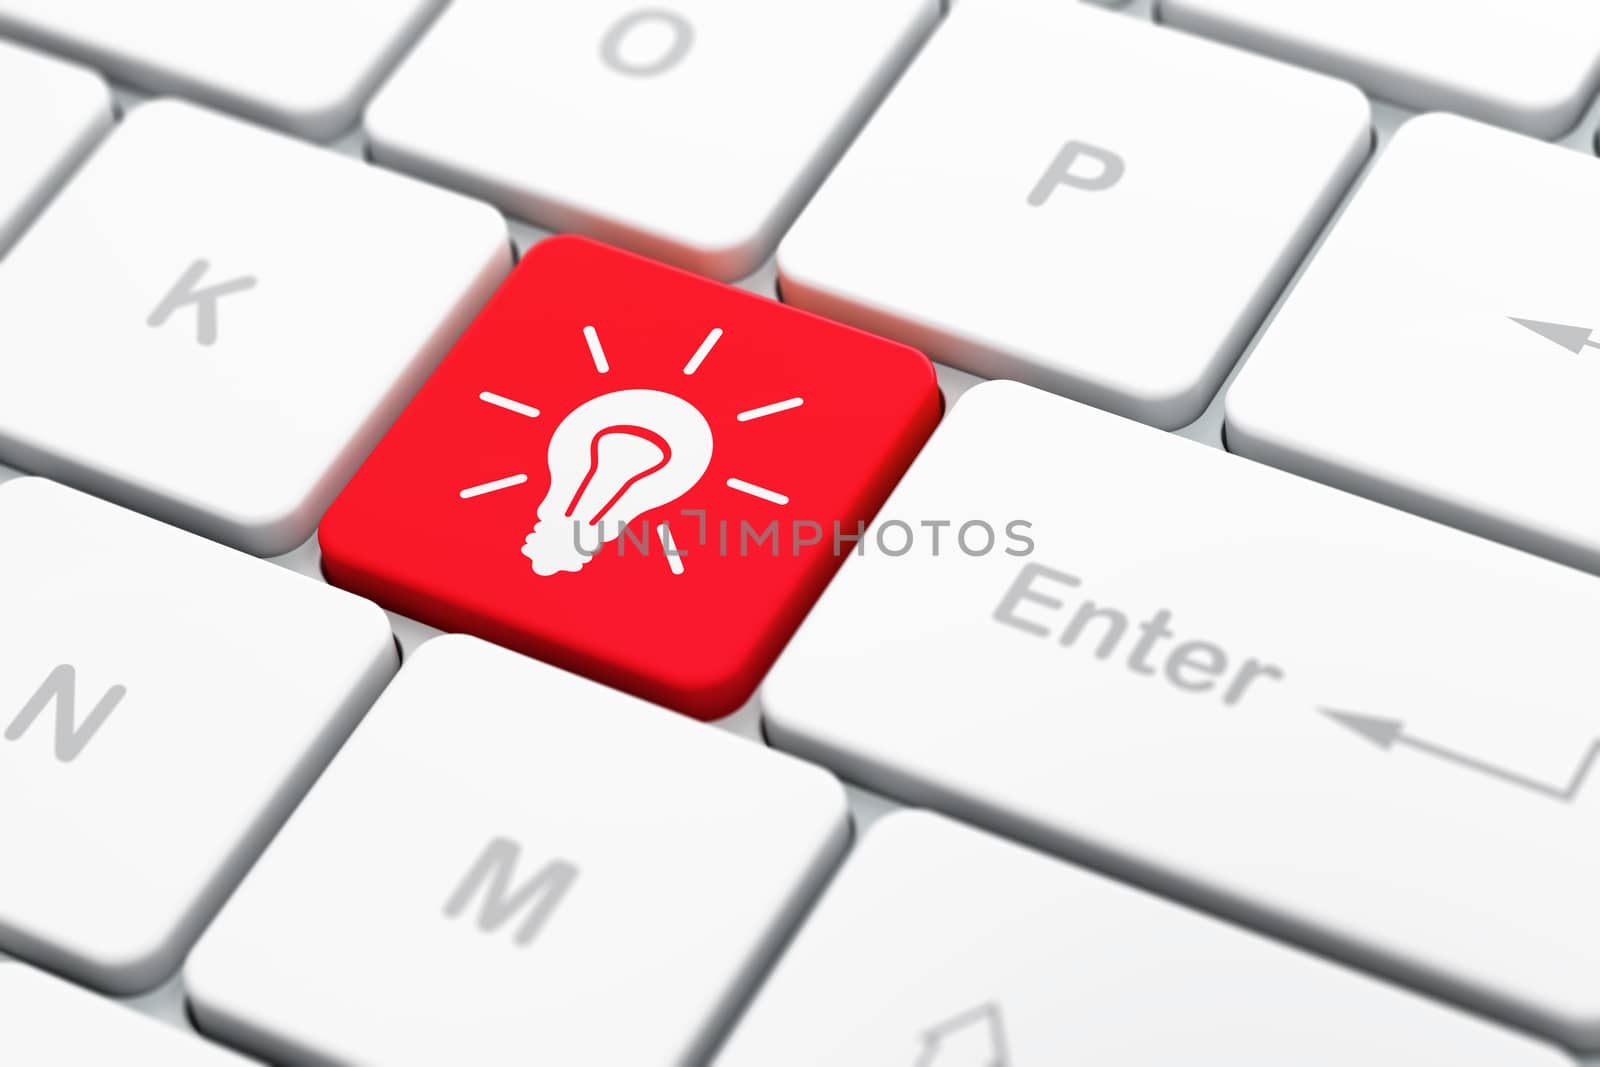 Business concept: computer keyboard with Light Bulb icon on enter button background, selected focus, 3d render